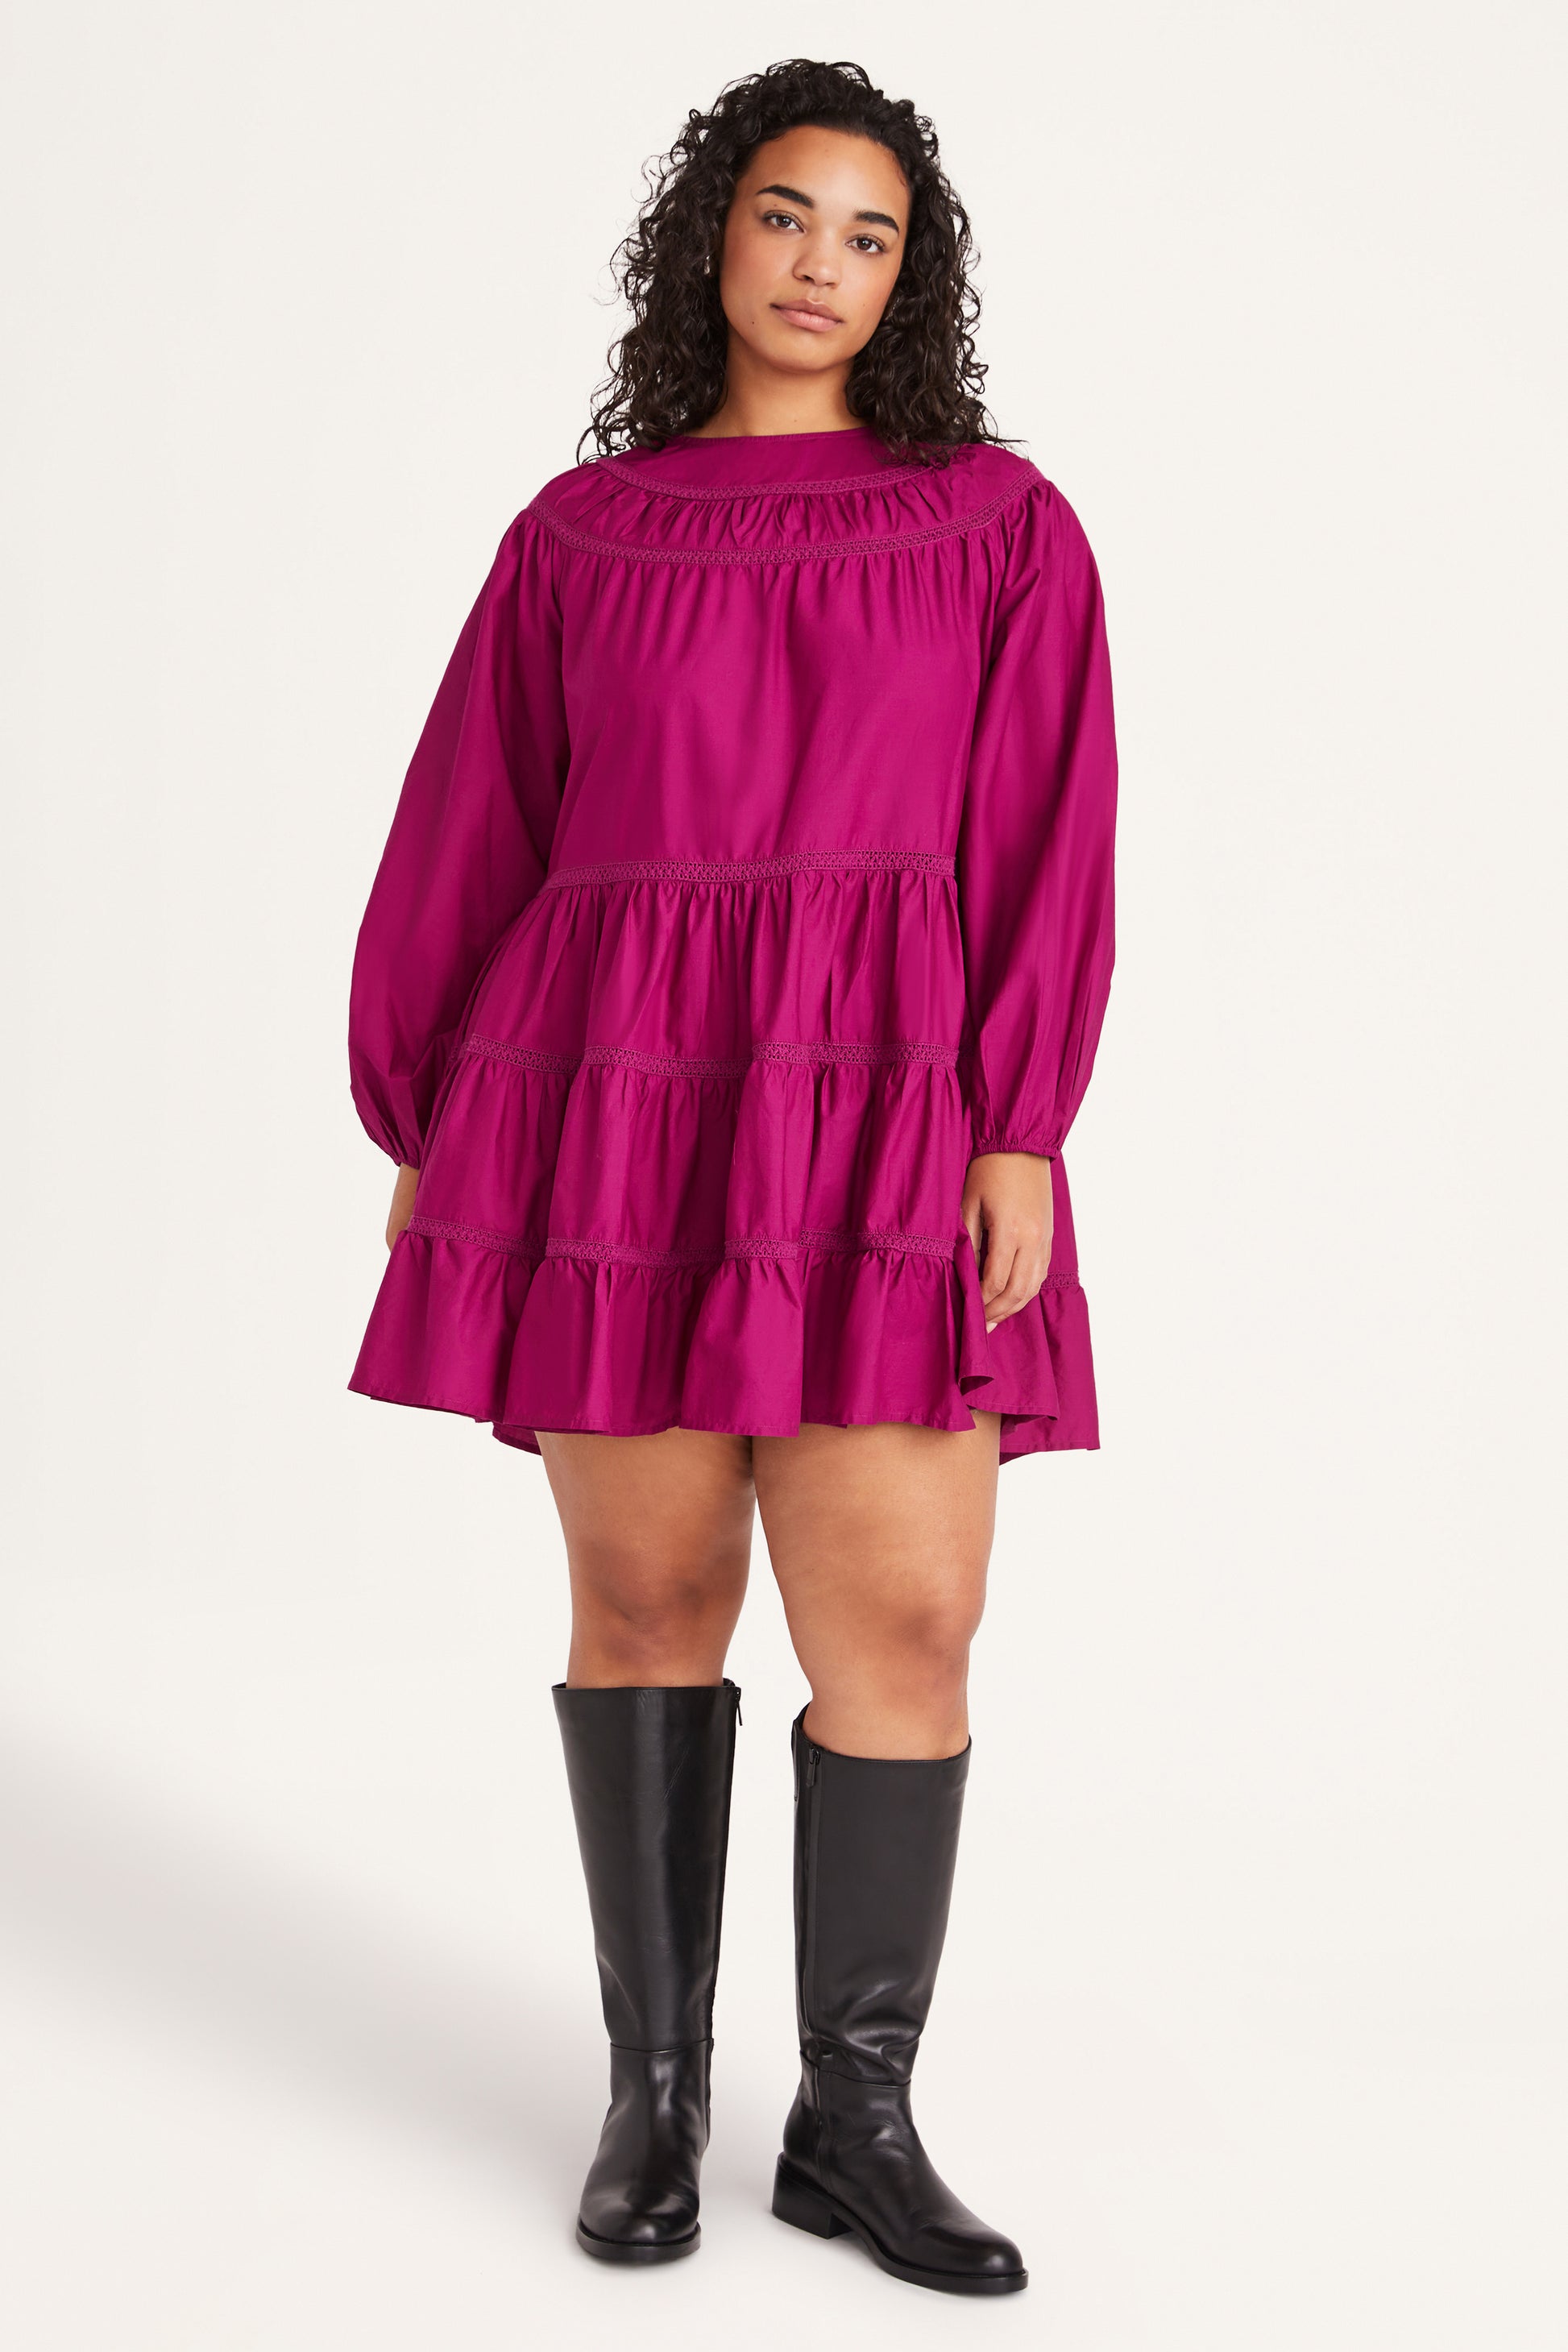 Pink Plus Size Clothing, Everyday Low Prices